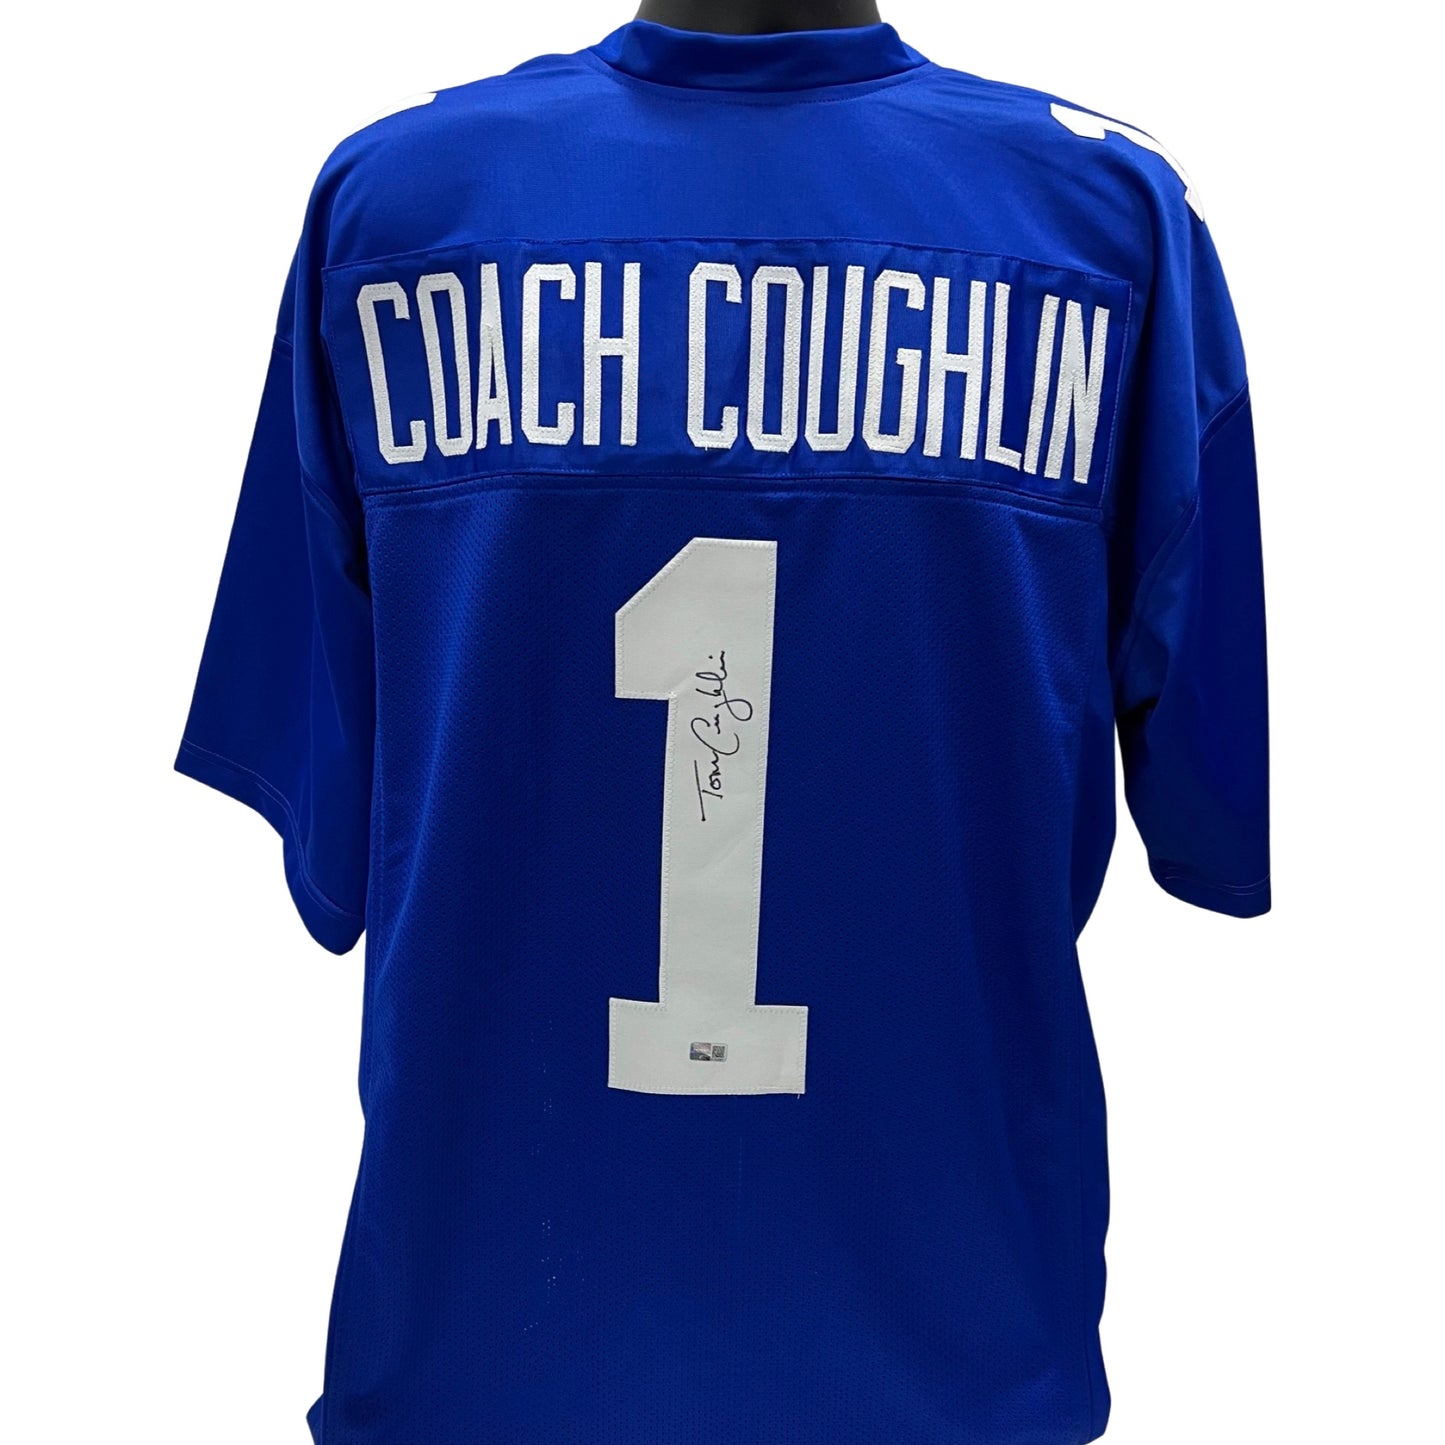 Tom Coughlin Autographed New York Giants Blue Jersey Steiner CX